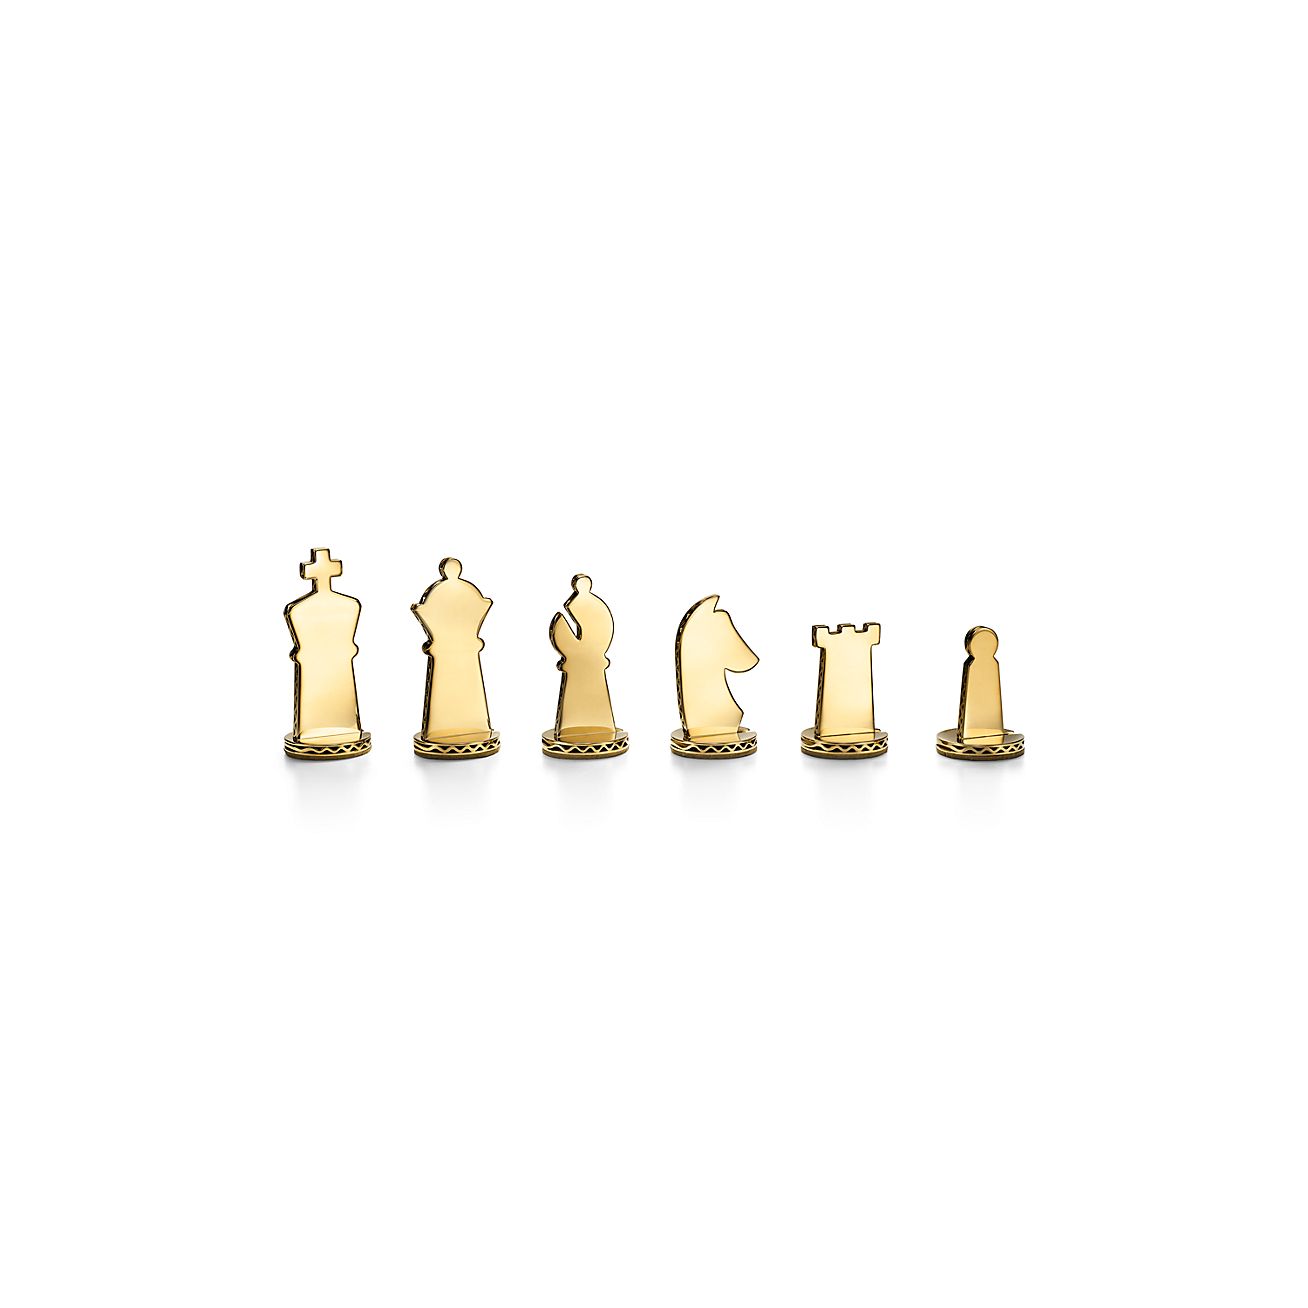 Everyday Objects sterling silver and 24k gold vermeil chess set